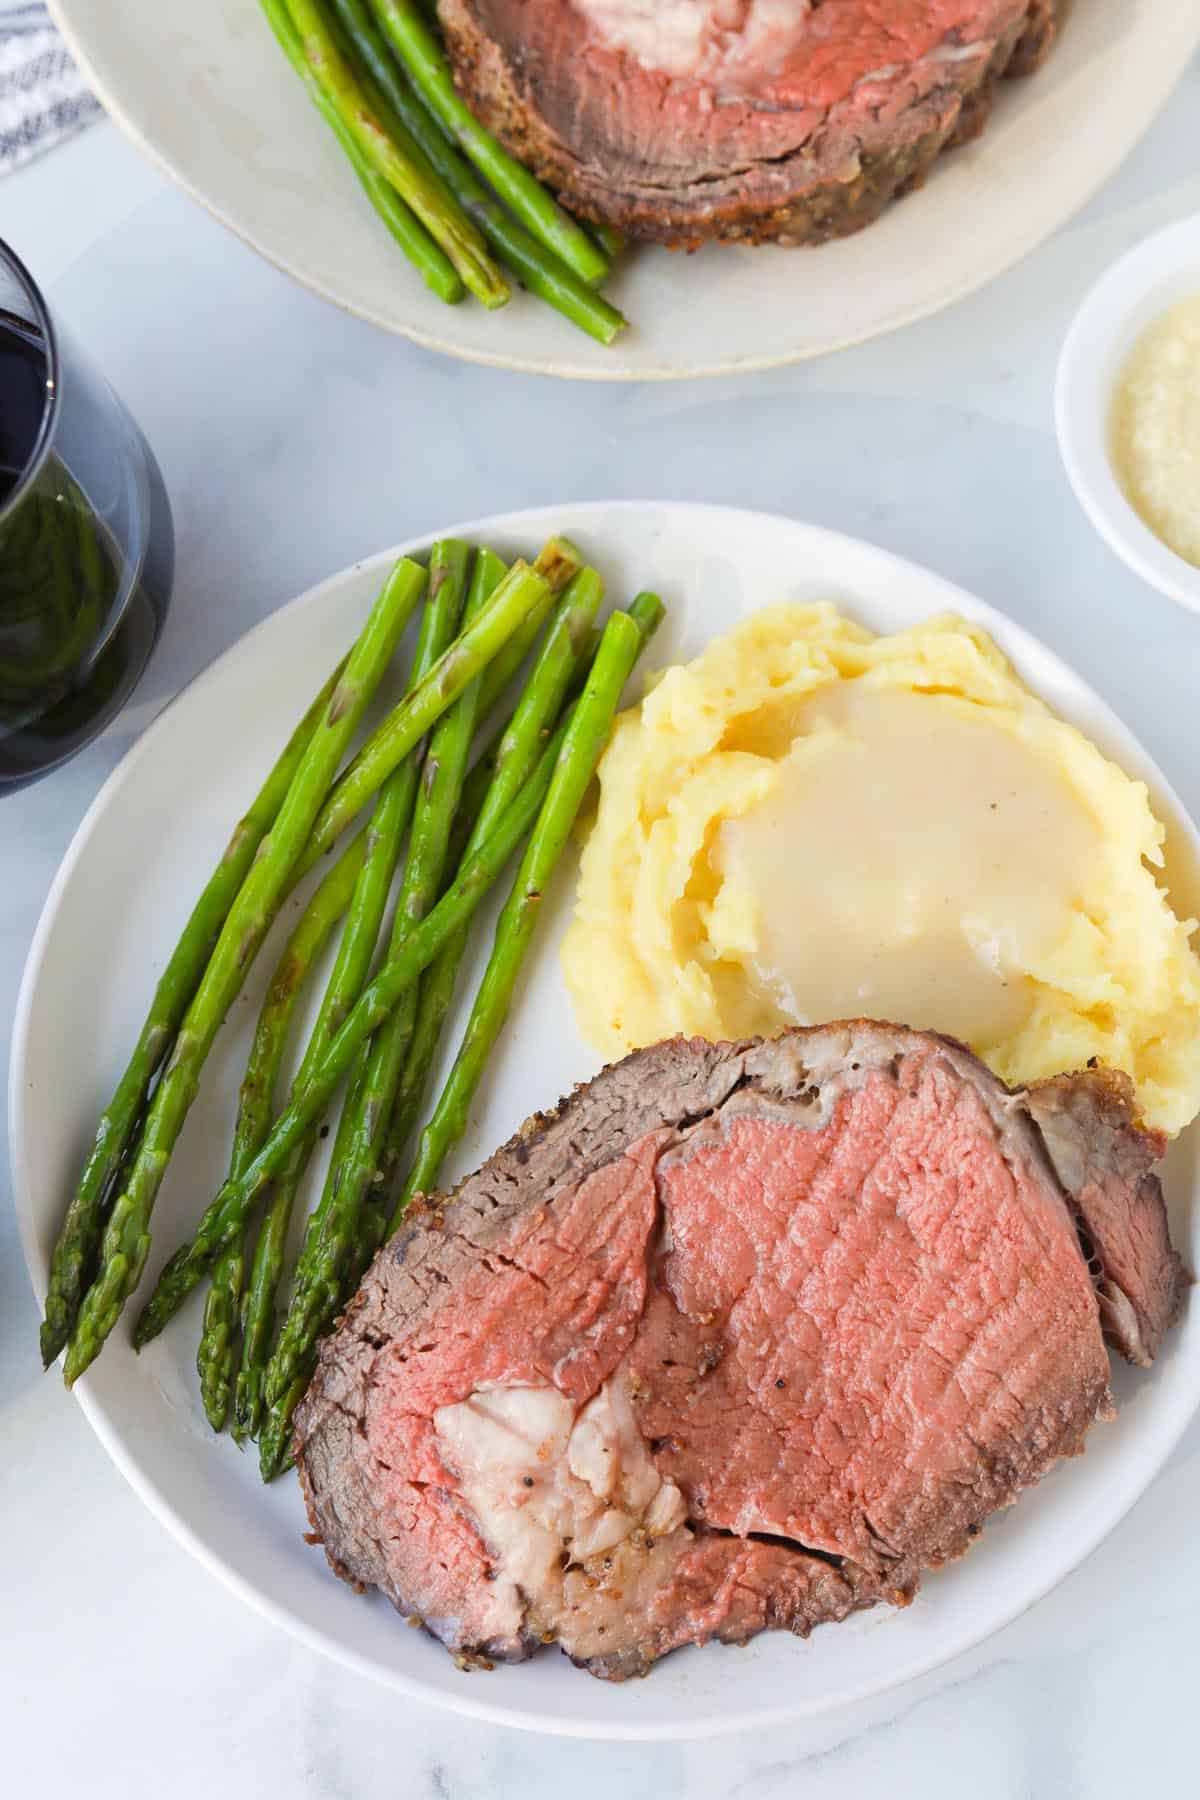 Prime rib roast dinner with mashed potatoes and asparagus.